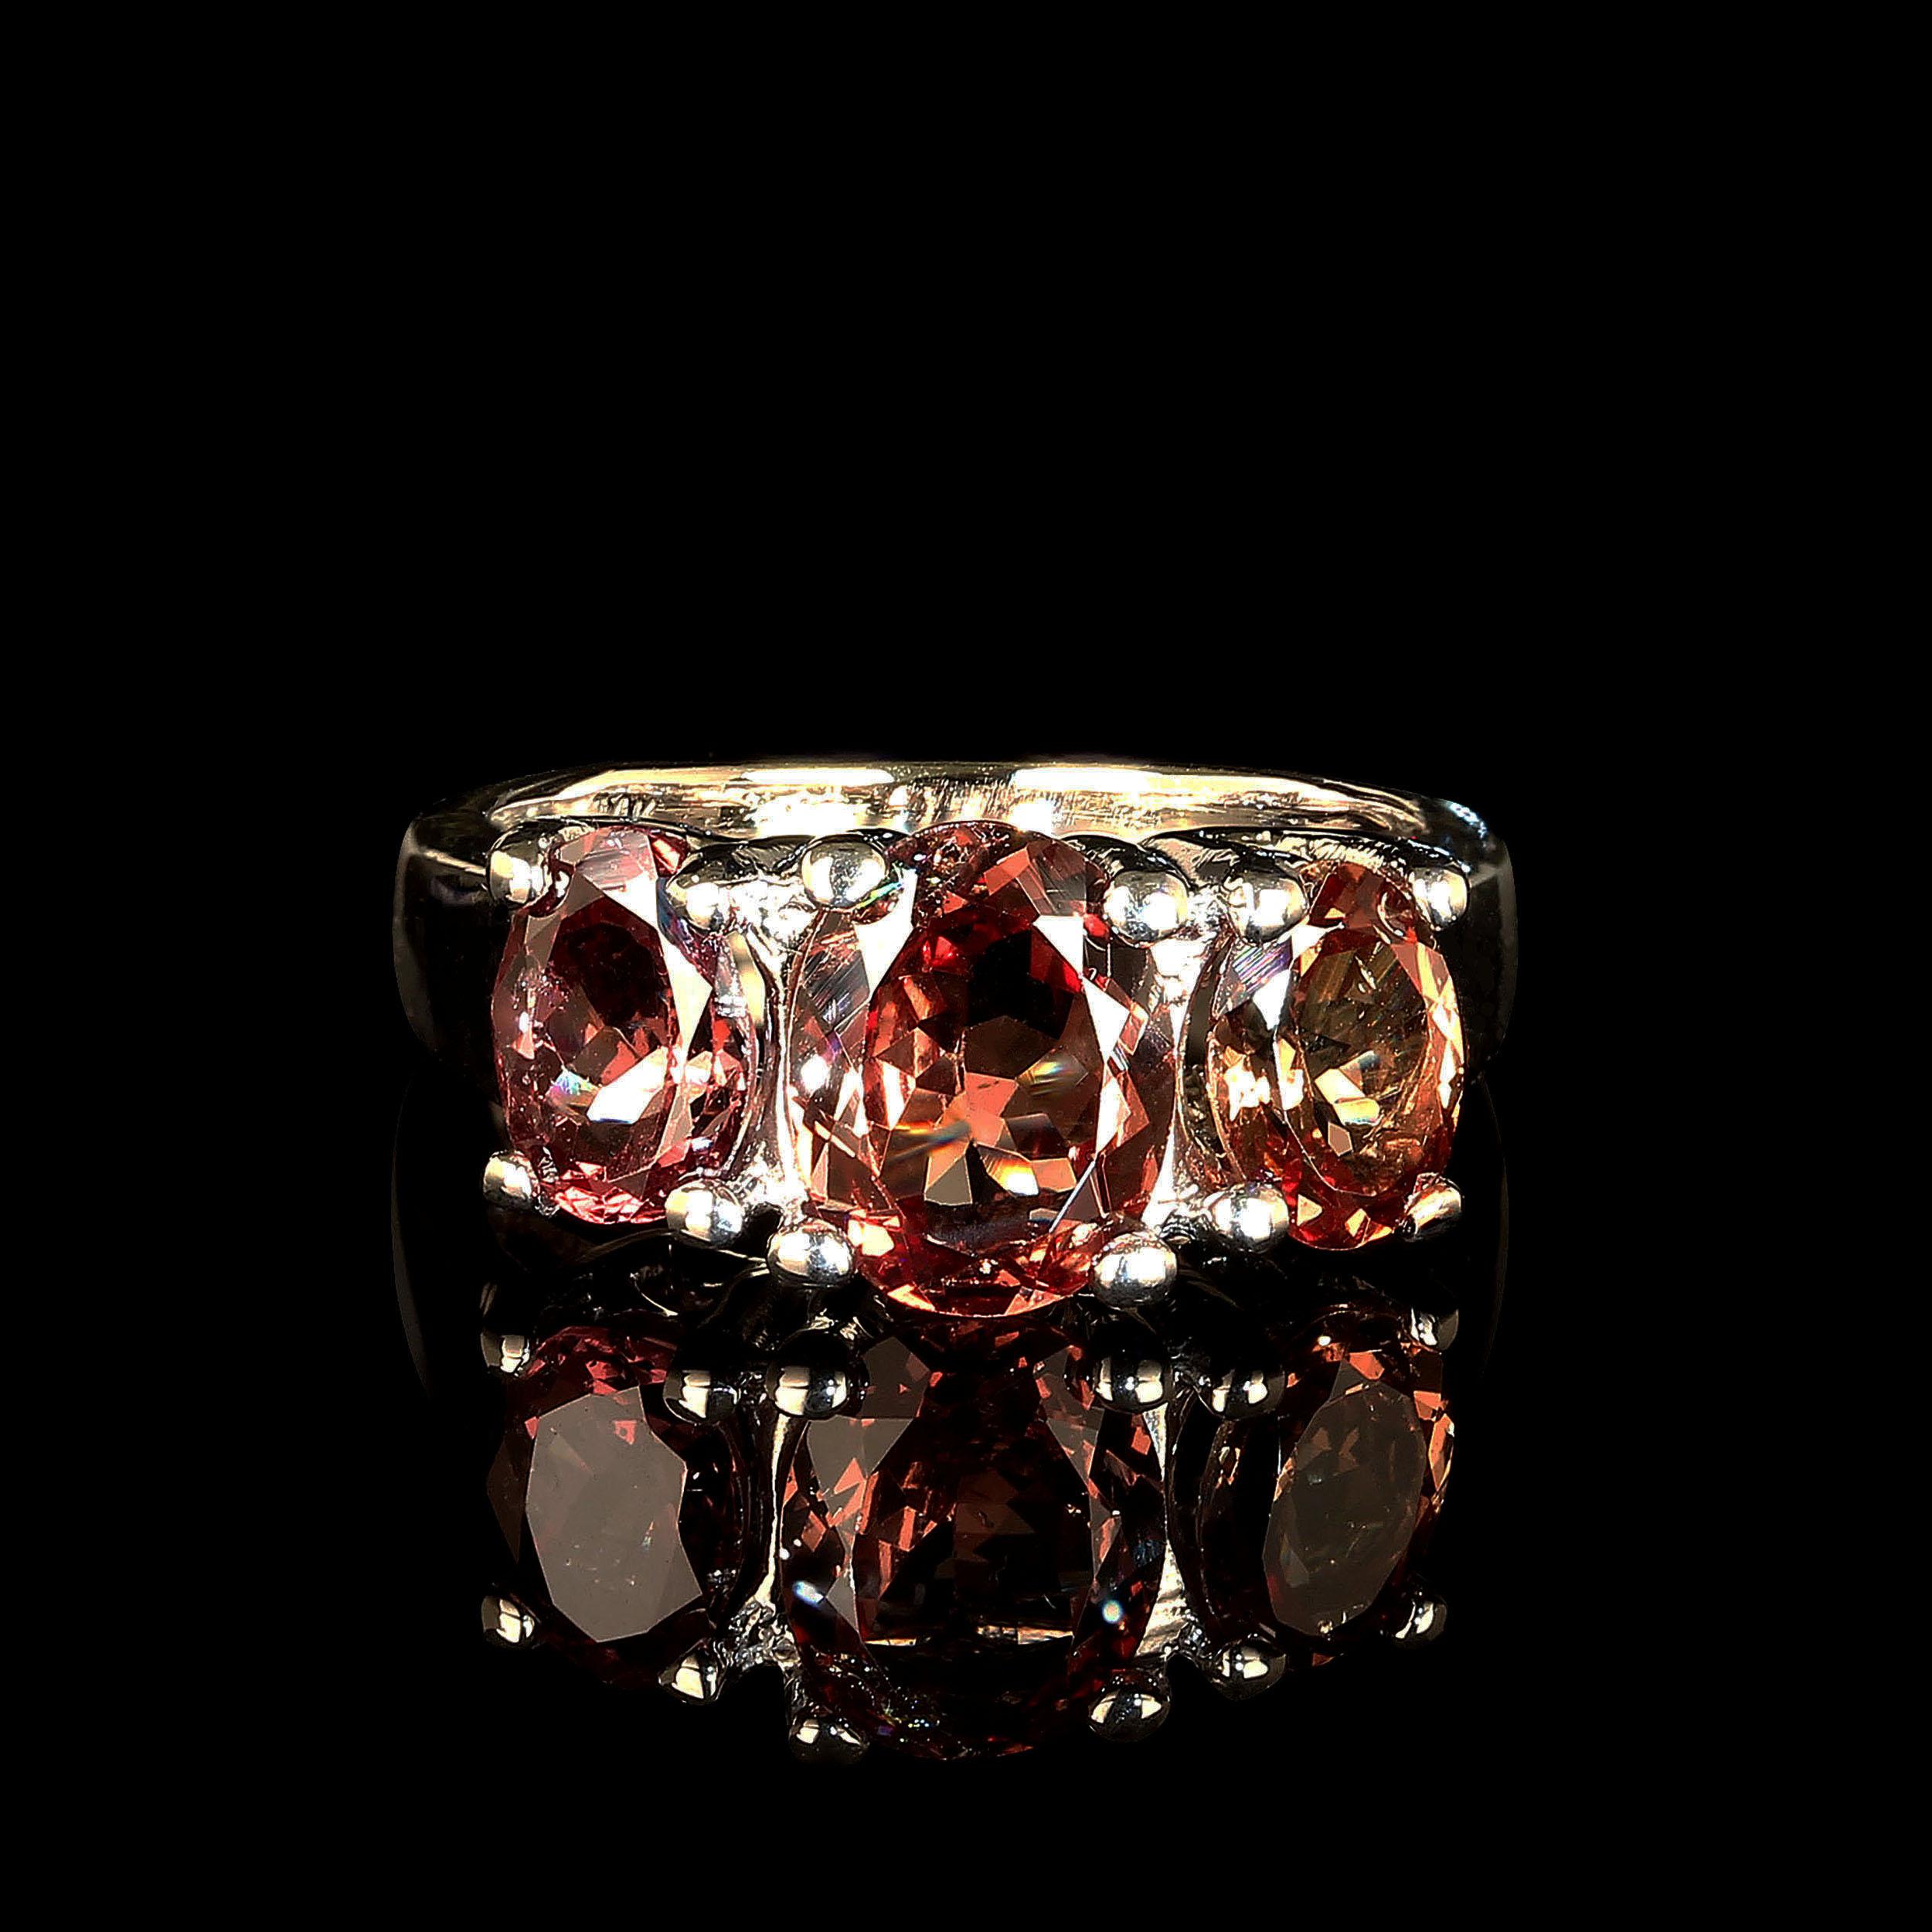 Great January Birthday gift!
14K White Gold Setting cuddles these three lovely color shift Garnets.  They make a subtle shift from pinky brown to goldy brown with a light change. These 3.96 total carats are just the thing for all you Garnet lovers.